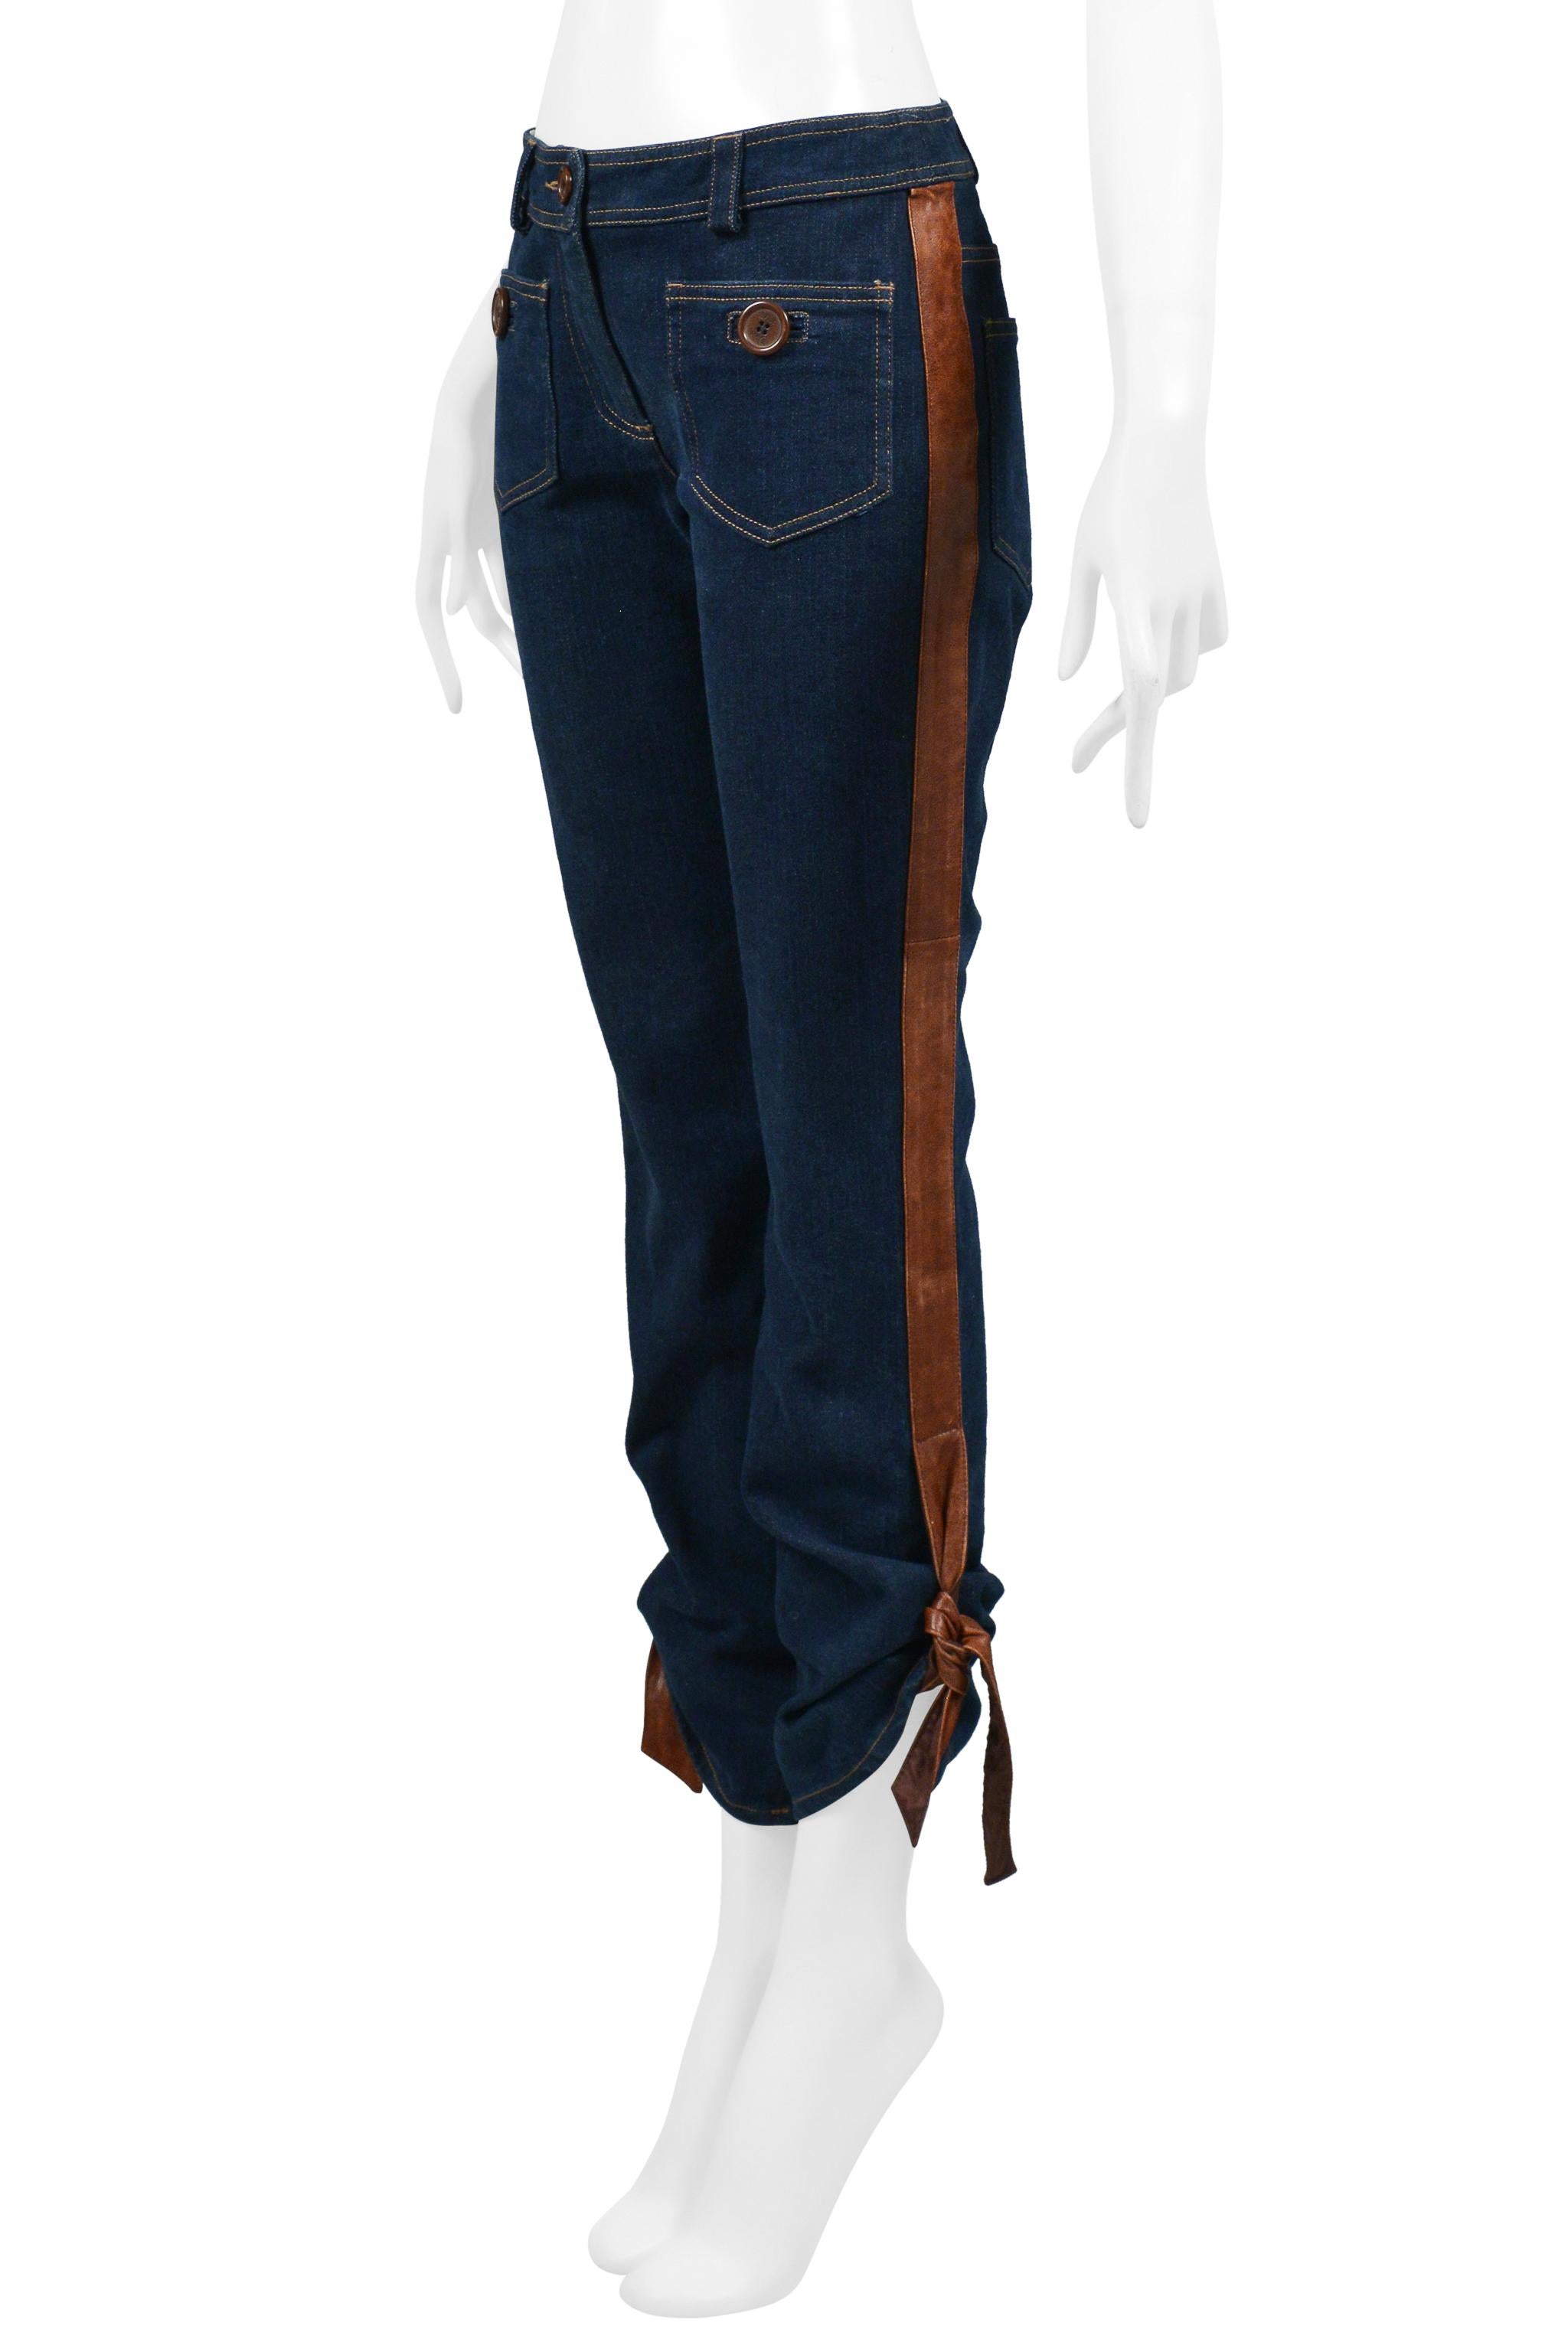 Christian Dior Blue Denim Jeans With Leather Trim & Ties 2005 In Excellent Condition For Sale In Los Angeles, CA